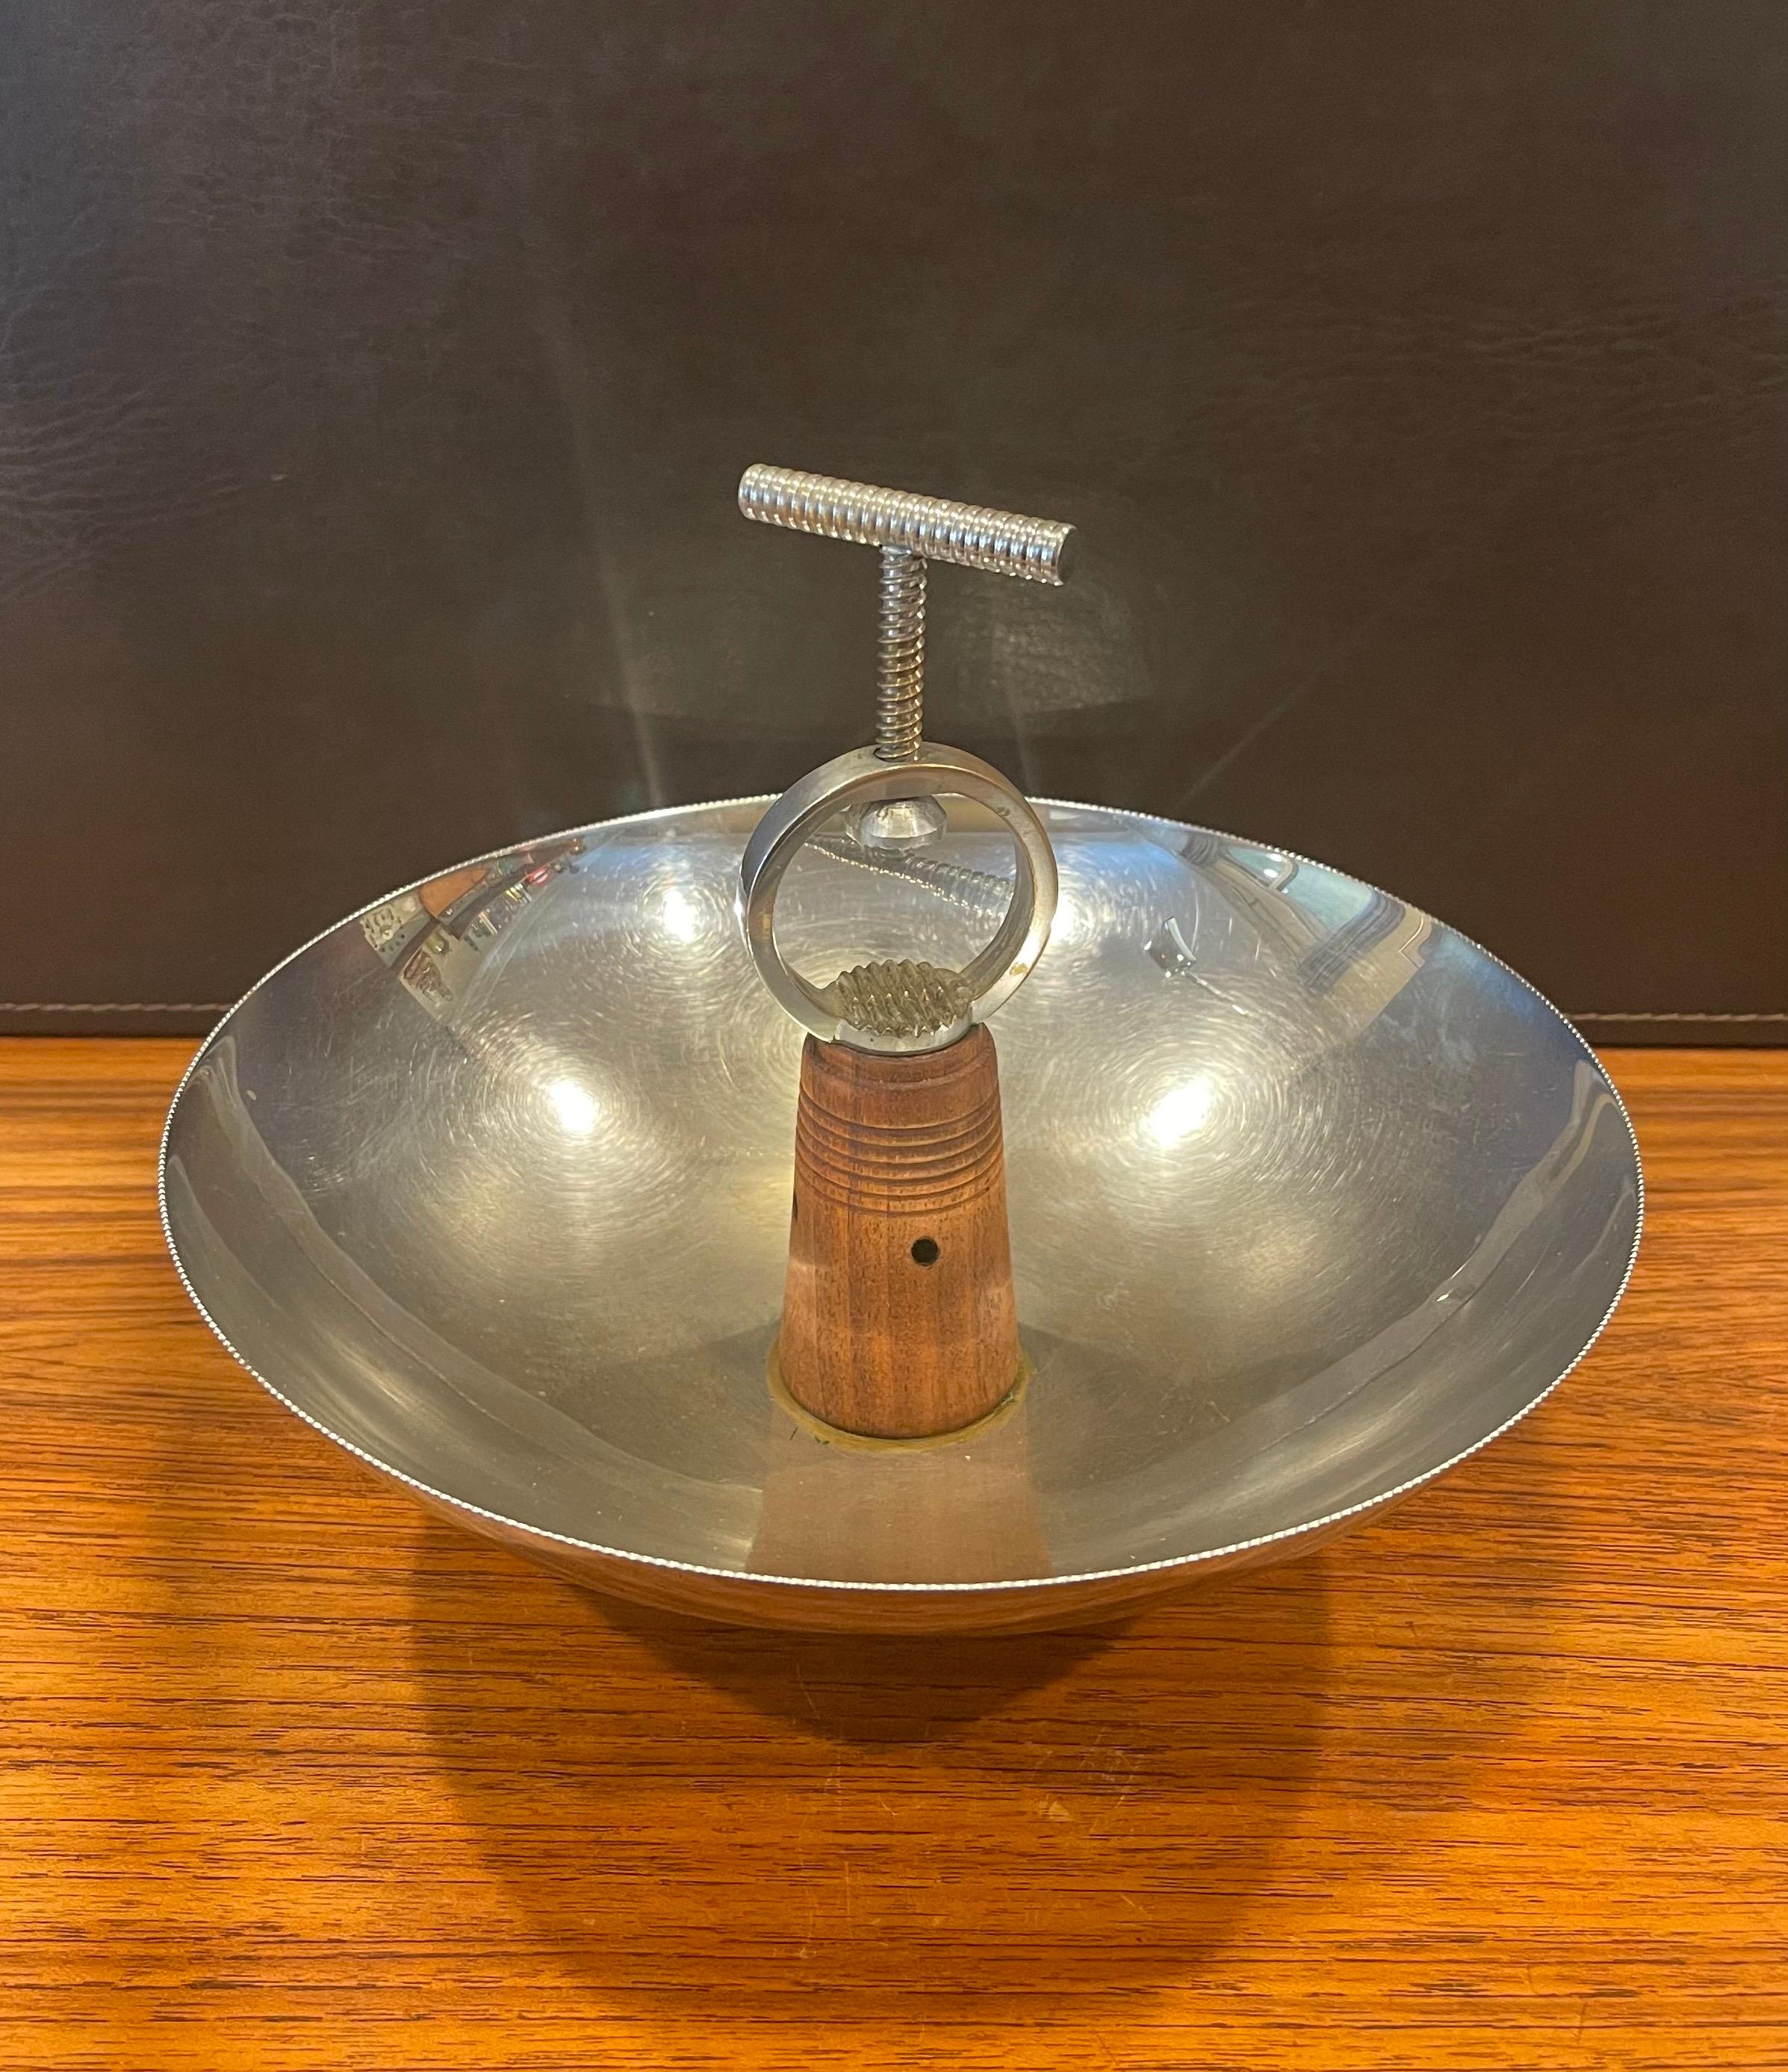 A very hard to find Art Deco chrome nut bowl with built-in screw cracker by Chase & Co., circa 1930s. The design features a solid walnut base and stem holding a round chrome bowl and metal hand screw cracker. The piece is in good condition; there is